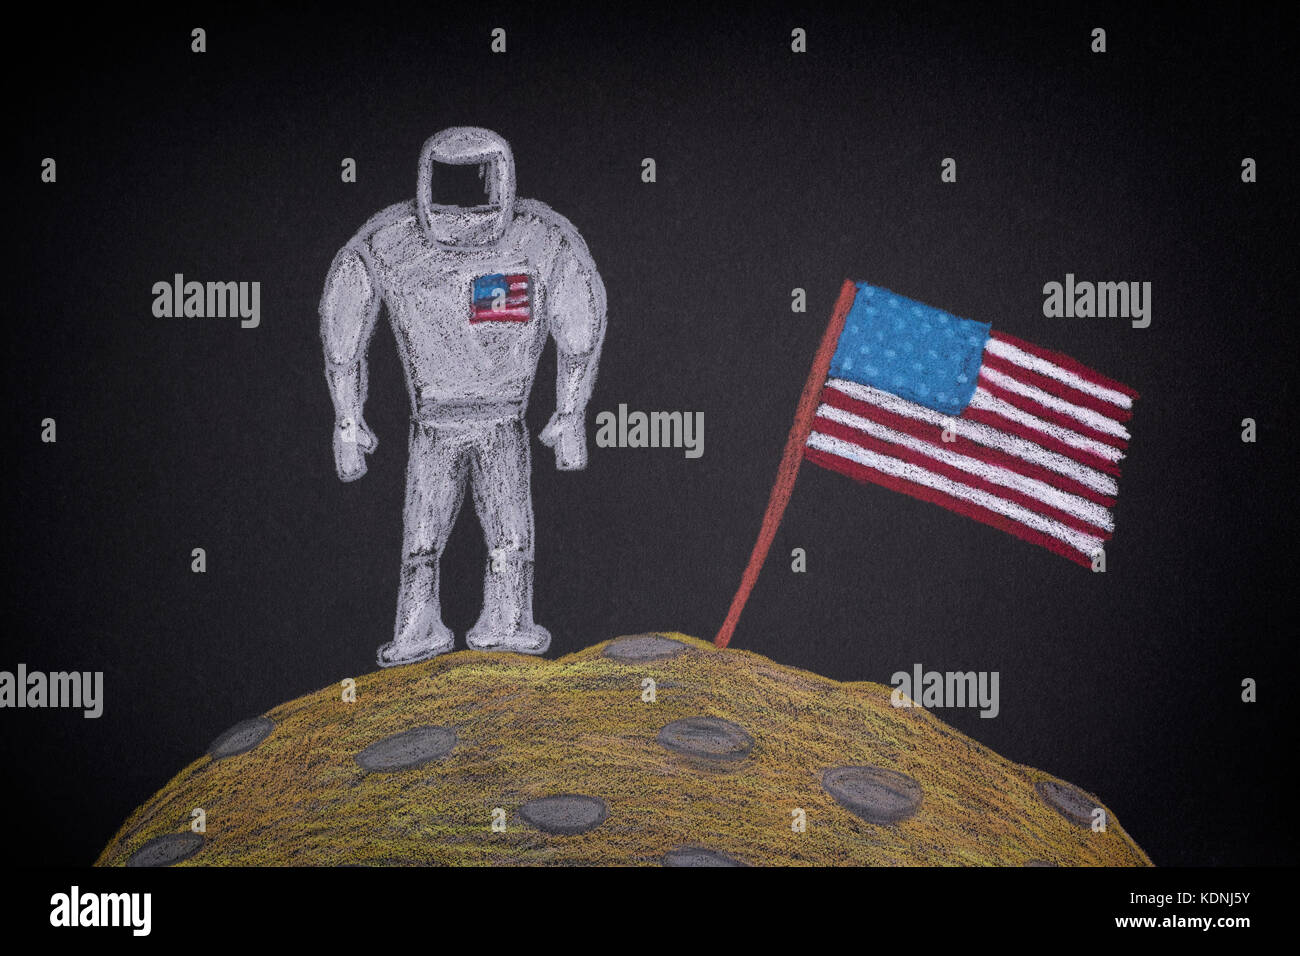 American Astronaut with American Flag on the Moon. Drawn by pencils. Stock Photo